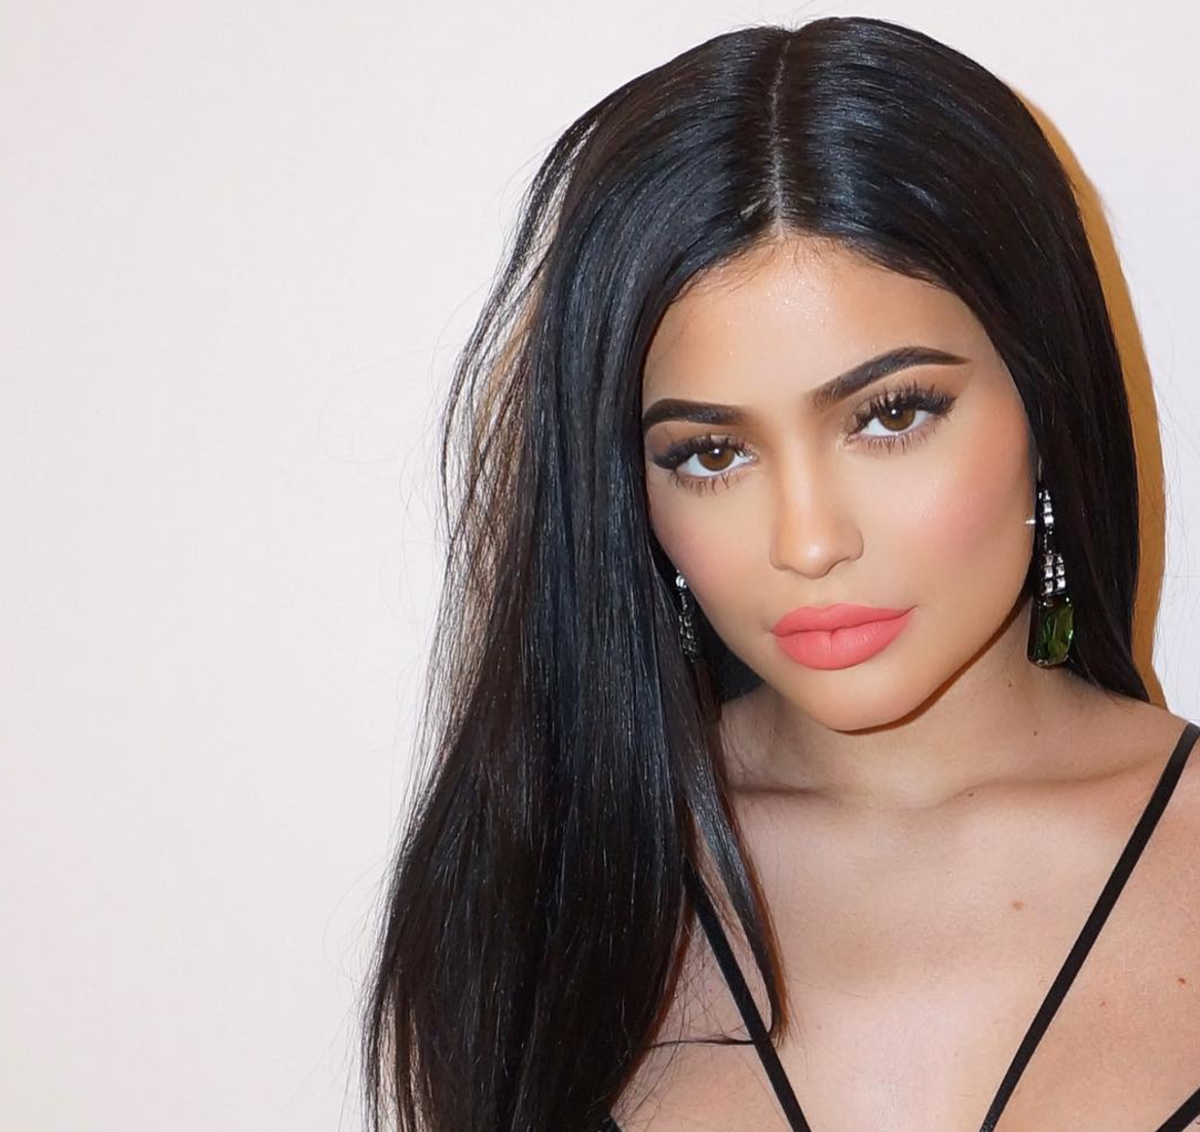 Kylie Jenner is Attempting to Go Vegan: Here's Why it's So Important